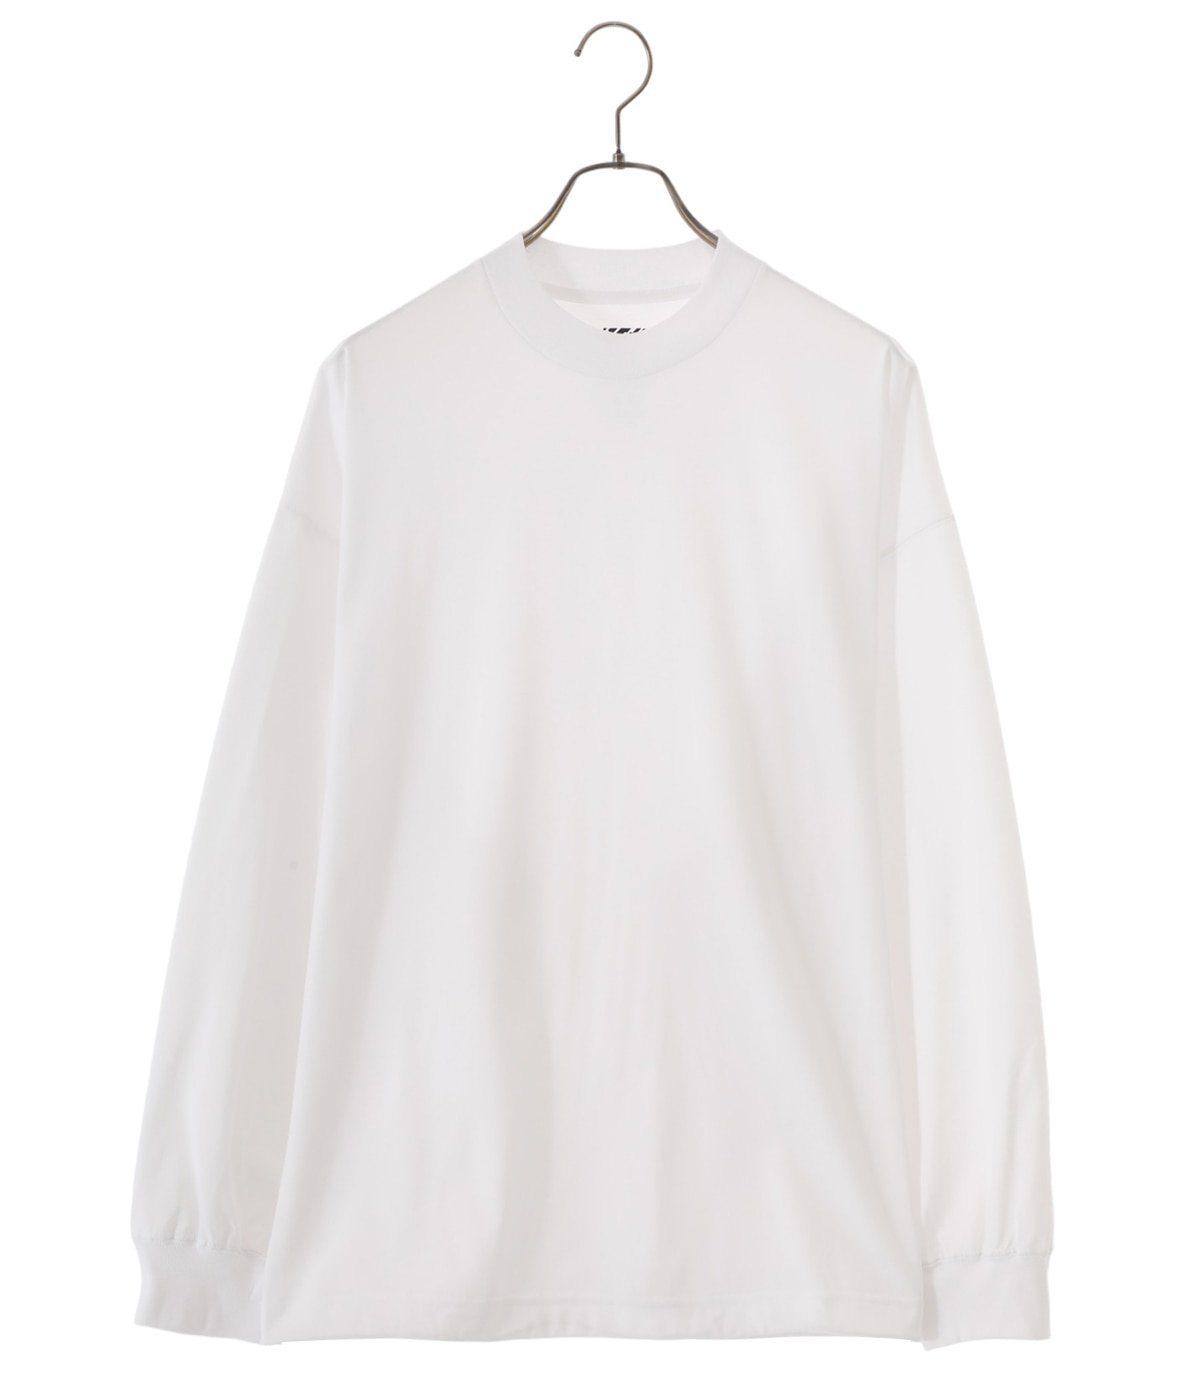 BALLOON LONG T SHIRT | is-ness(イズネス) / トップス カットソー長袖 ...